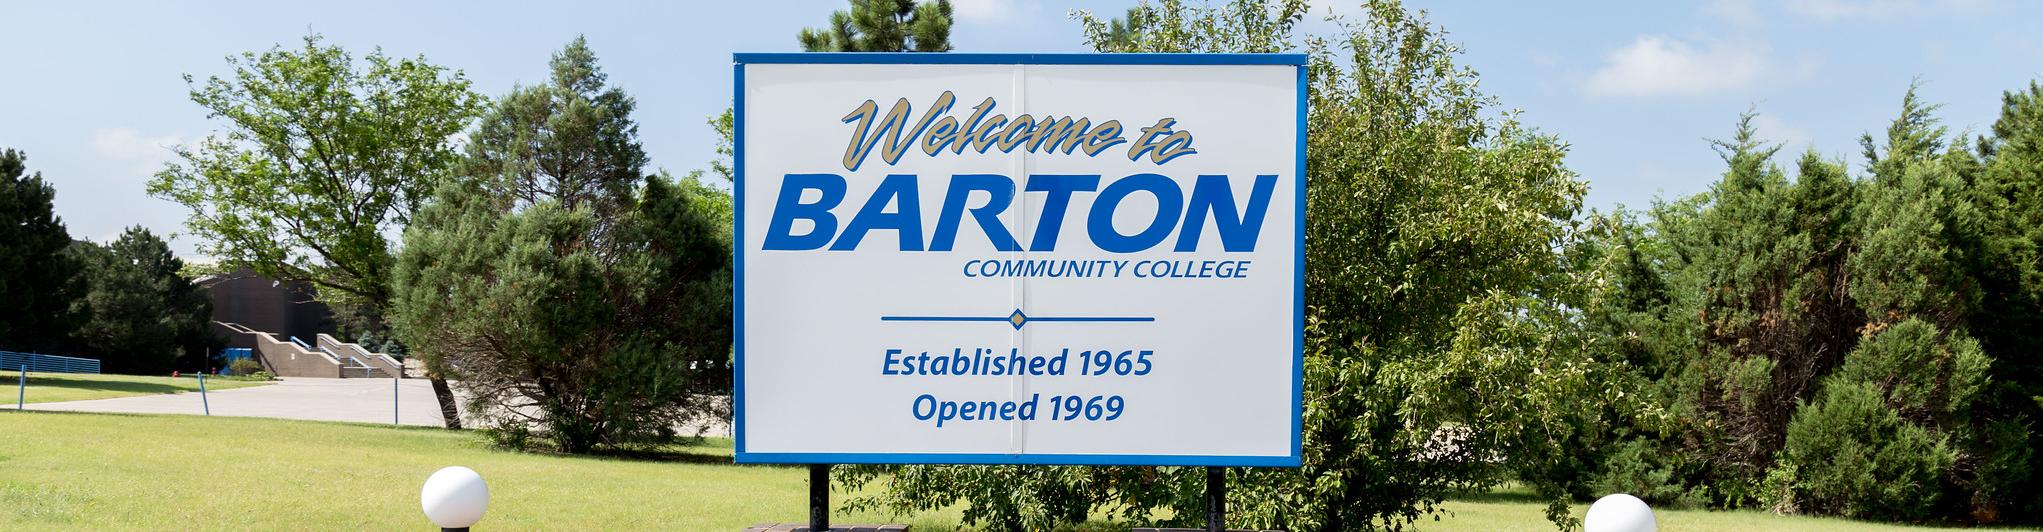 Welcome to Barton sign